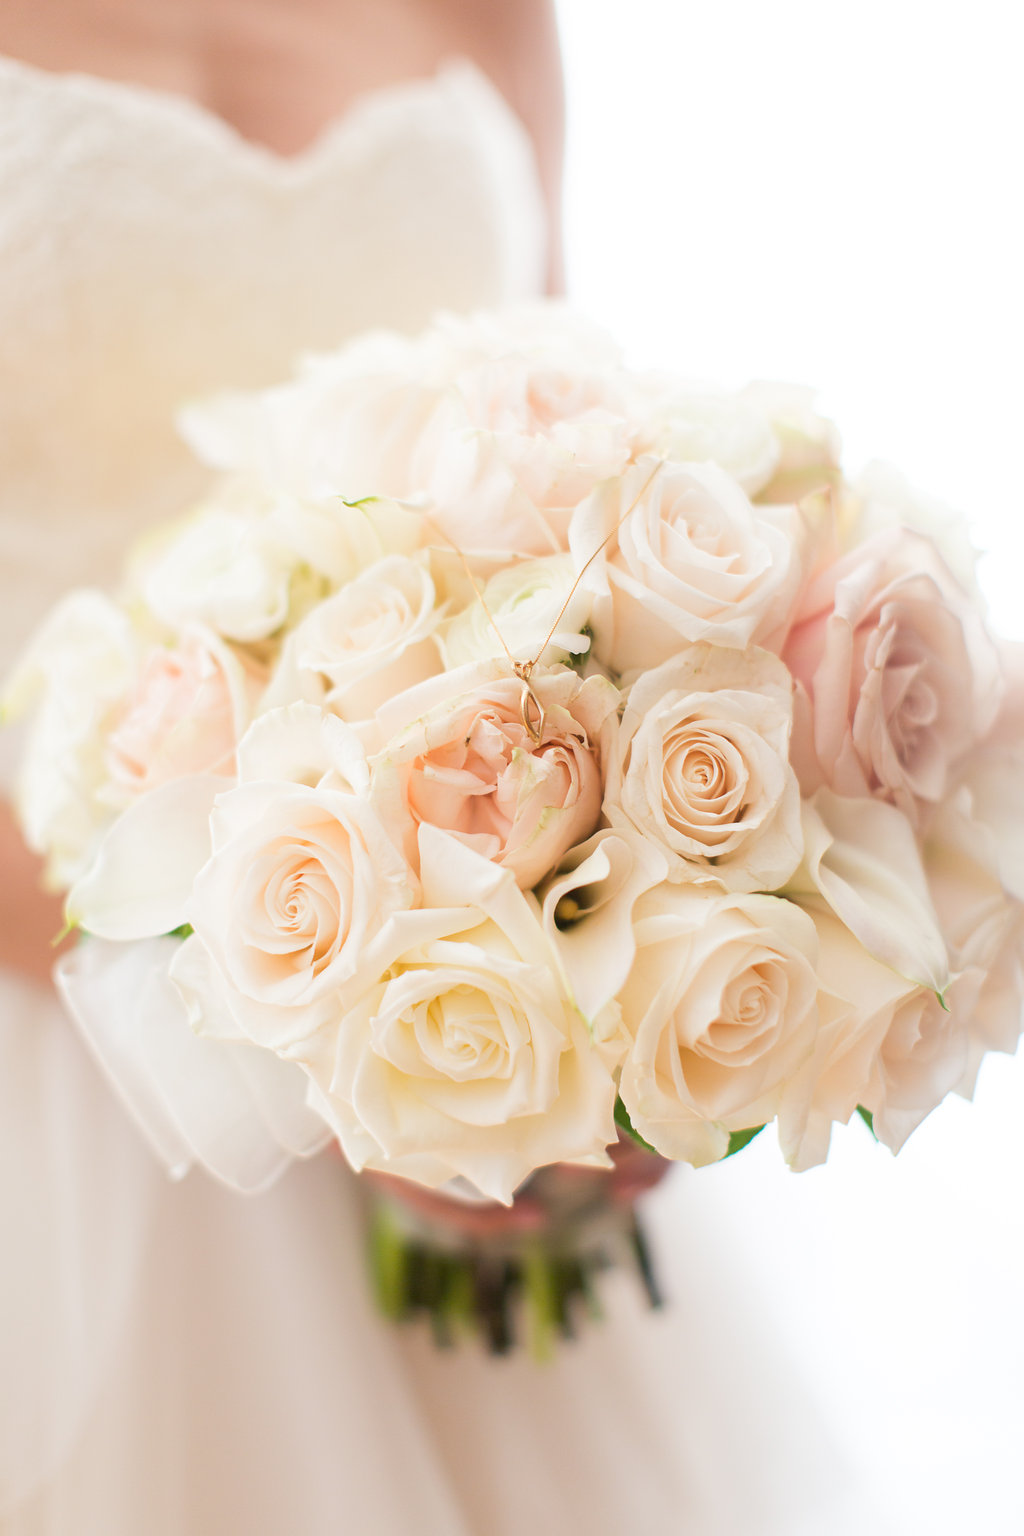 White and Blush Bridal Bouquet